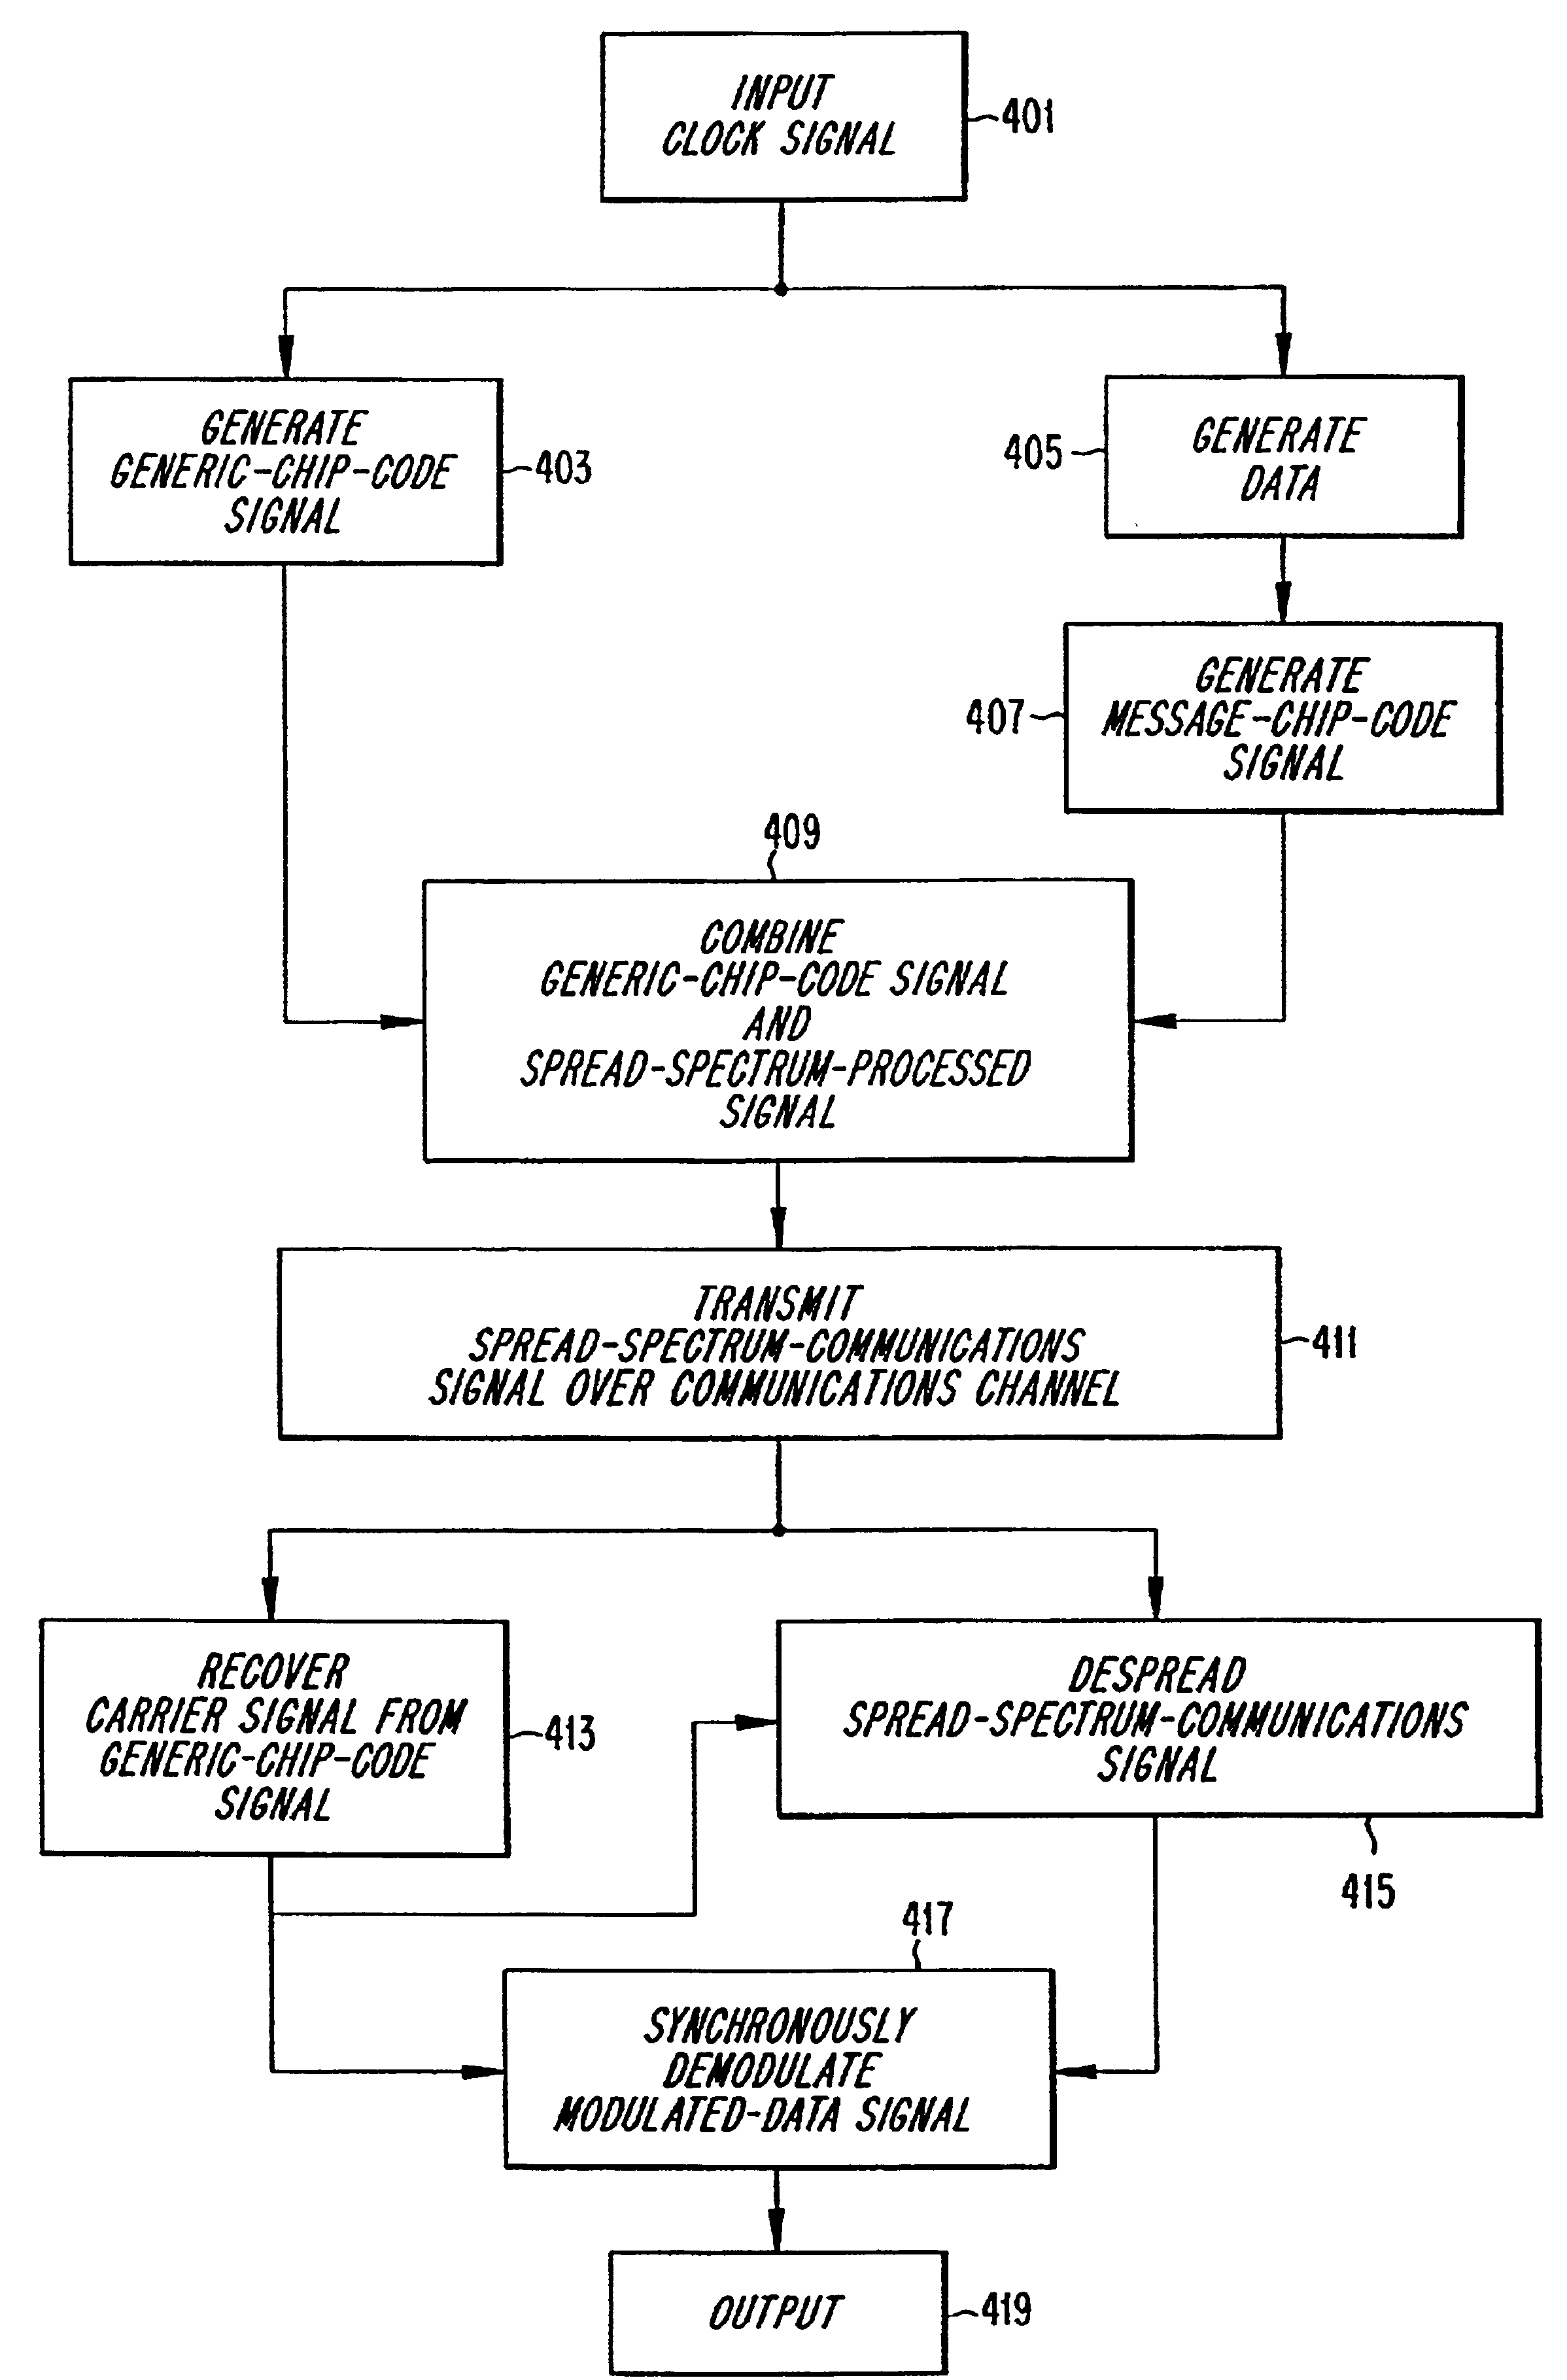 Geolocation of a mobile terminal in a CDMA communication system